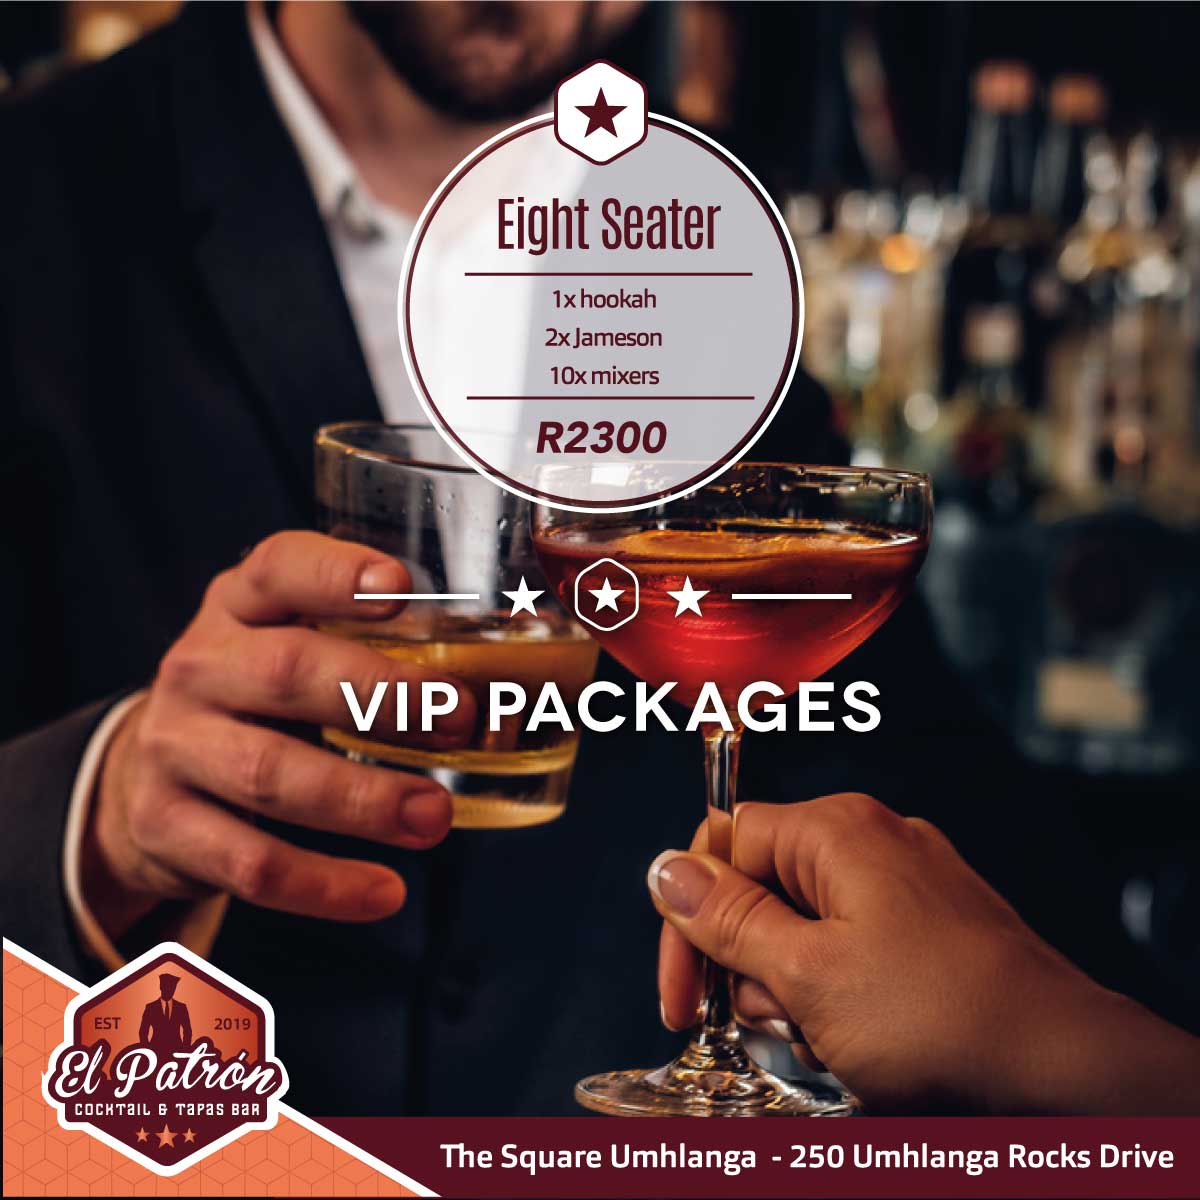 VIP PACKAGE 8 SEATER JAMESON SPECIAL